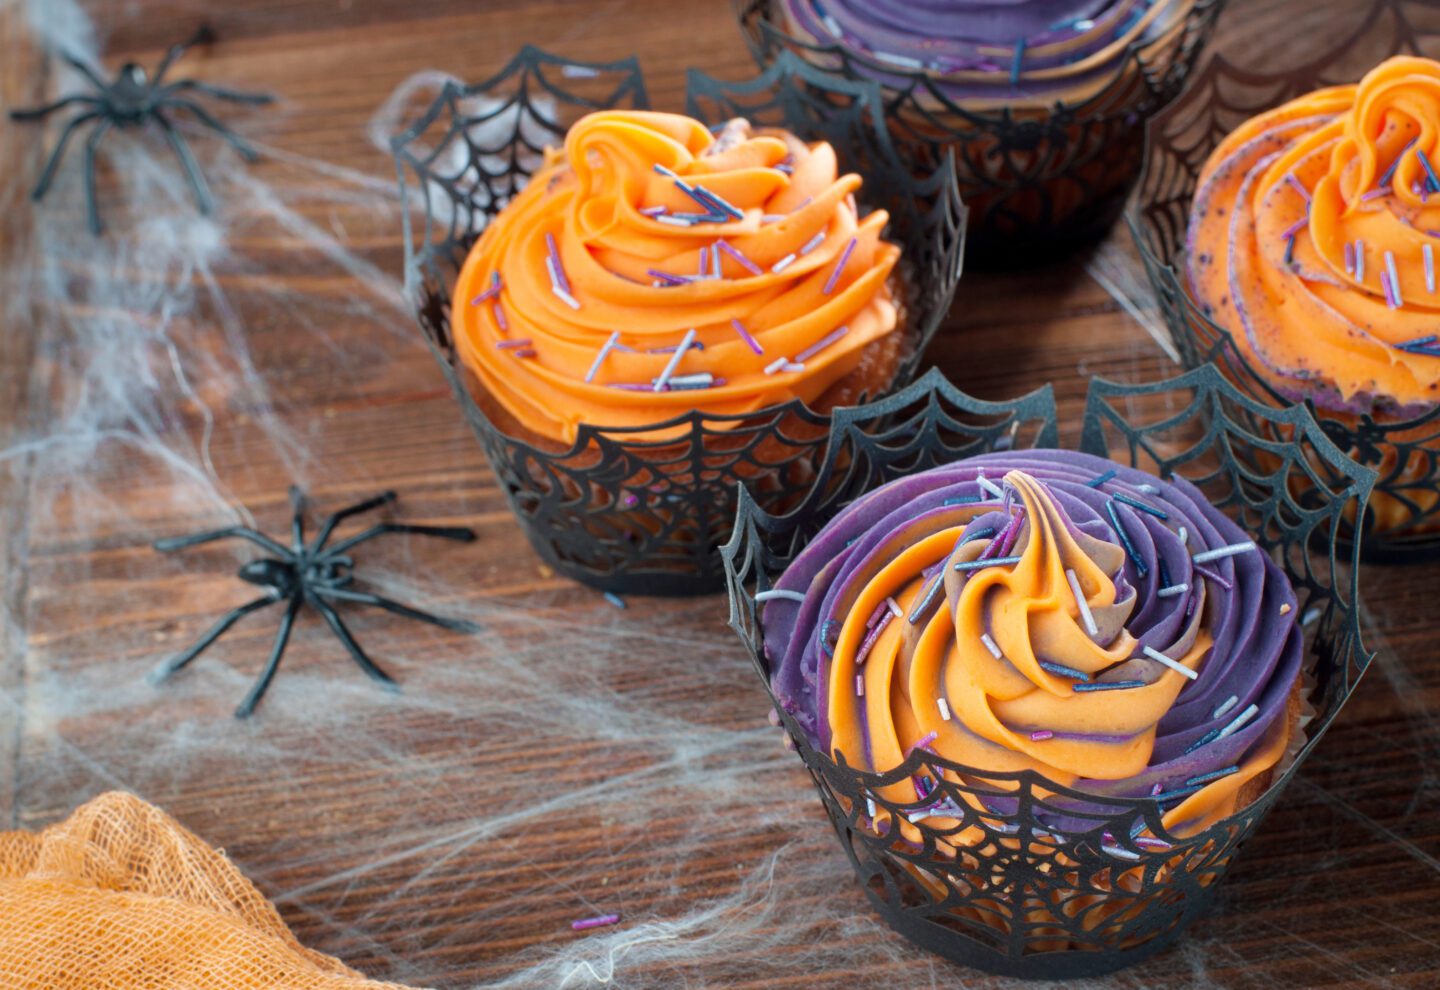 Halloween cupckes with purple and orange icing for an educational Halloween